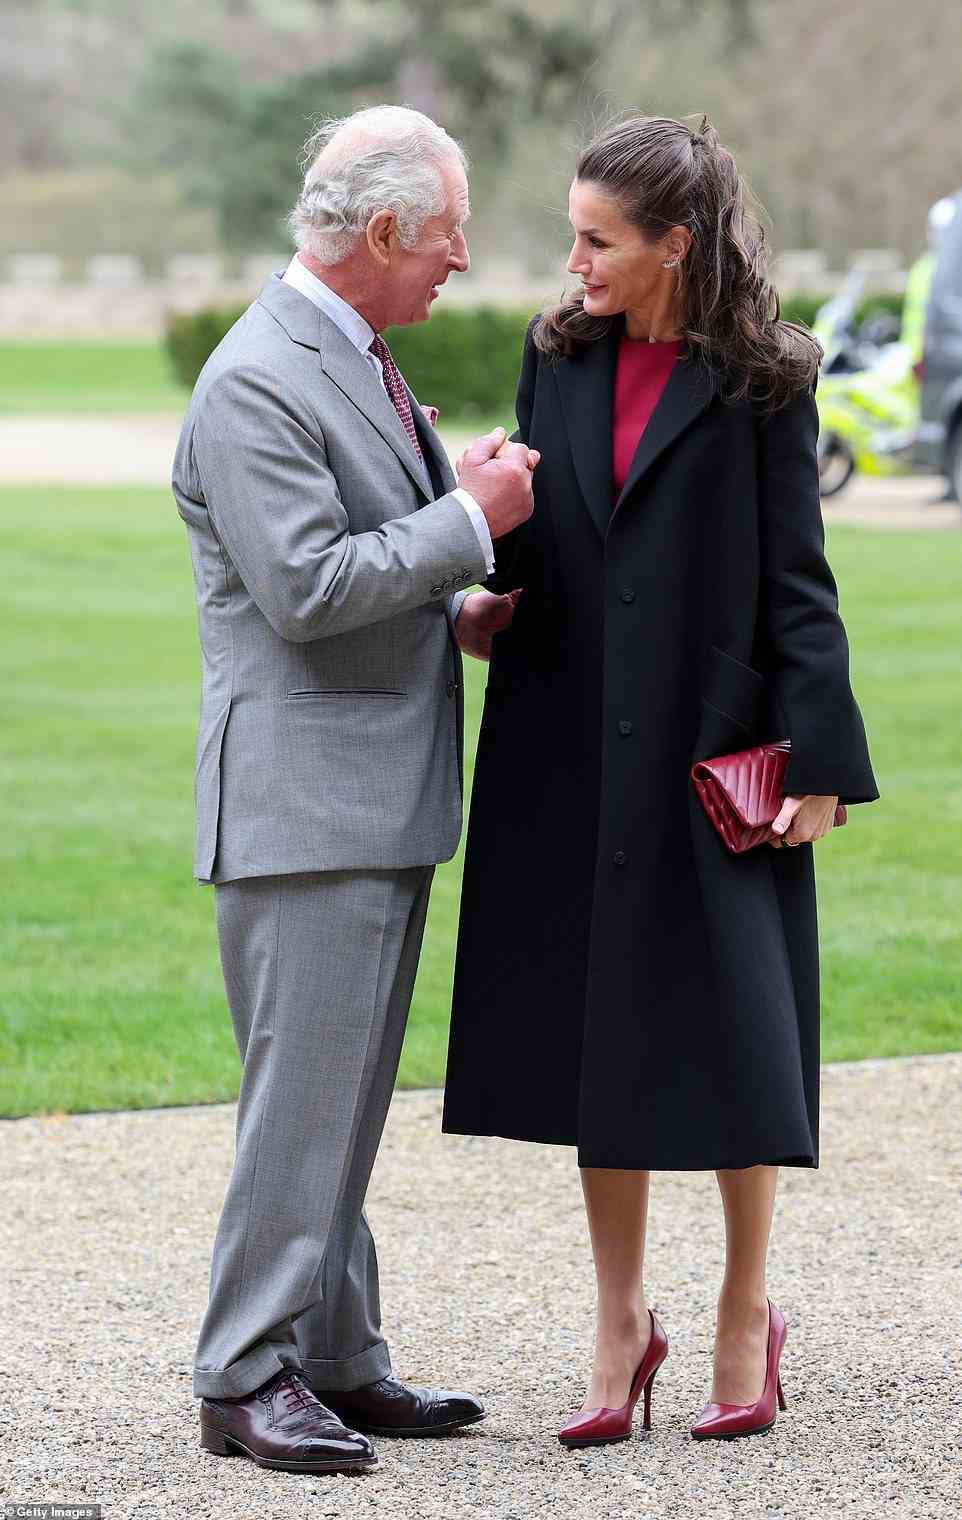 The 73-year-old could be seen holding the hand of the Spanish royal as the pair met in County Durham for the rare joint appearance earlier today